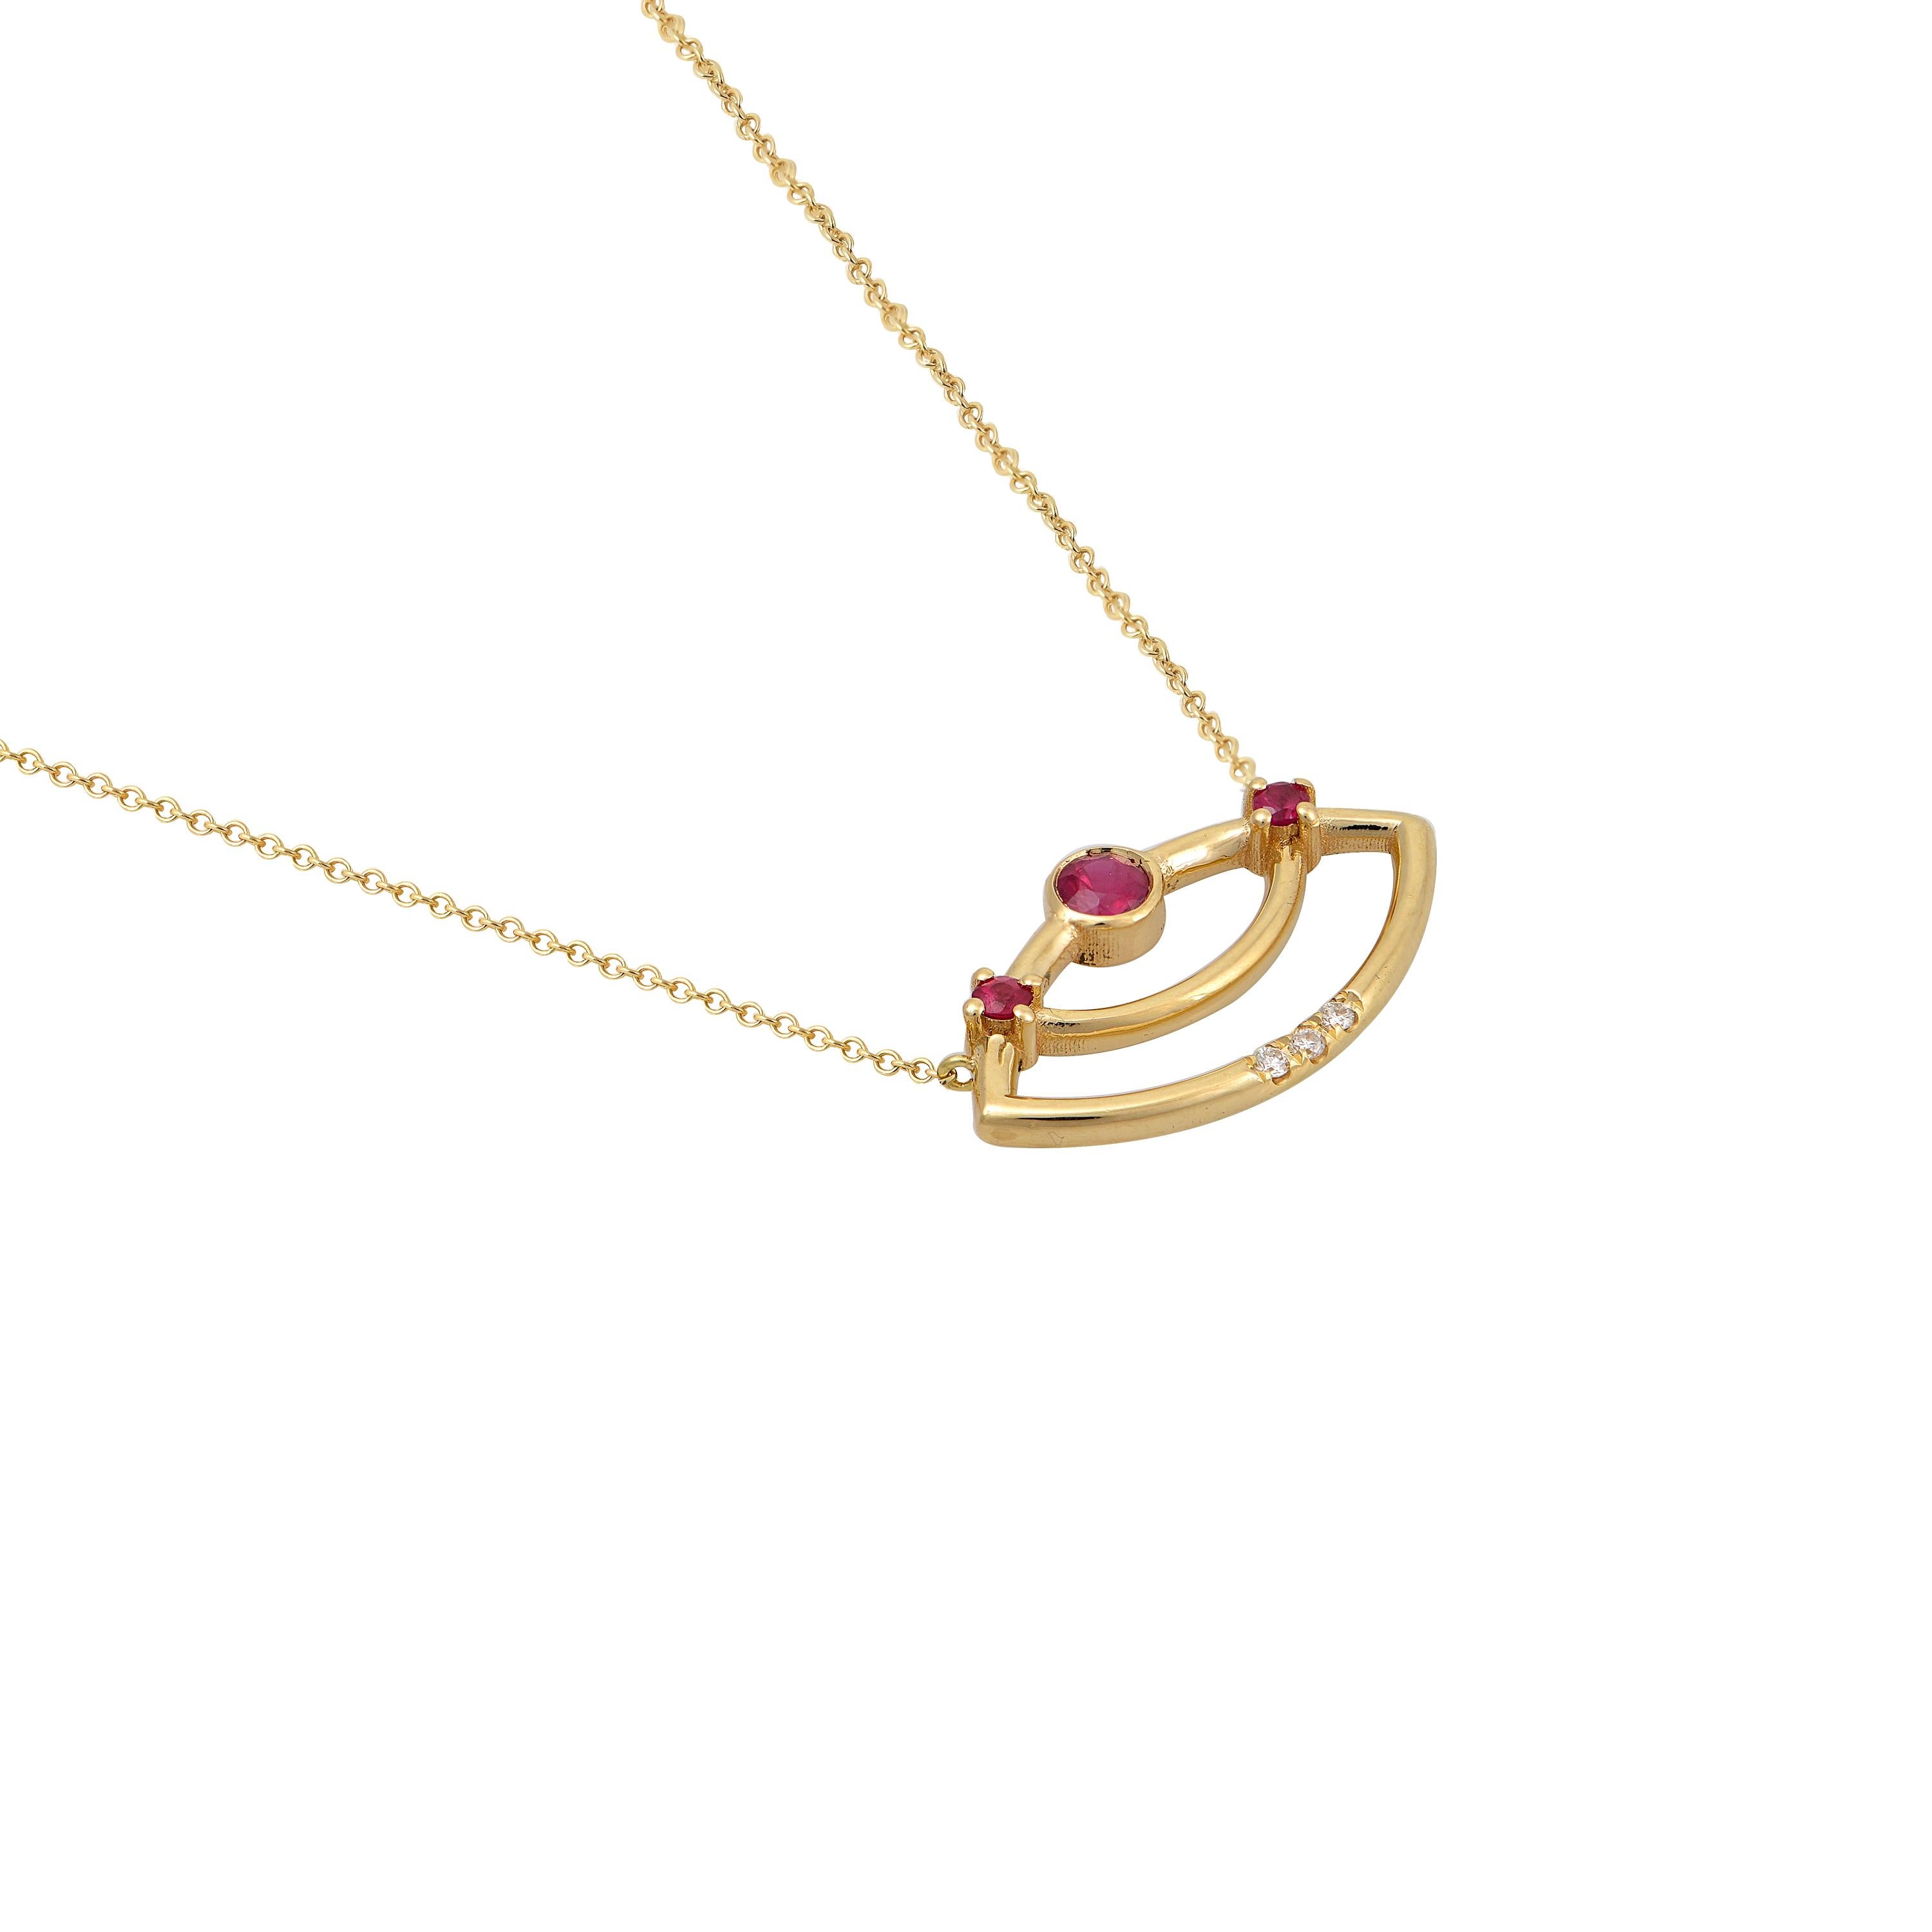 Designer: Alexia Gryllaki
Dimensions: motif 19x16mm, chain 420mm and a second link at 400mm
Weight: approximately 2.3g 
Barcode: ING042P

The Interlocking Geometry pendant in 18 karat yellow gold with rubies approx. 0.20cts and round brilliant-cut